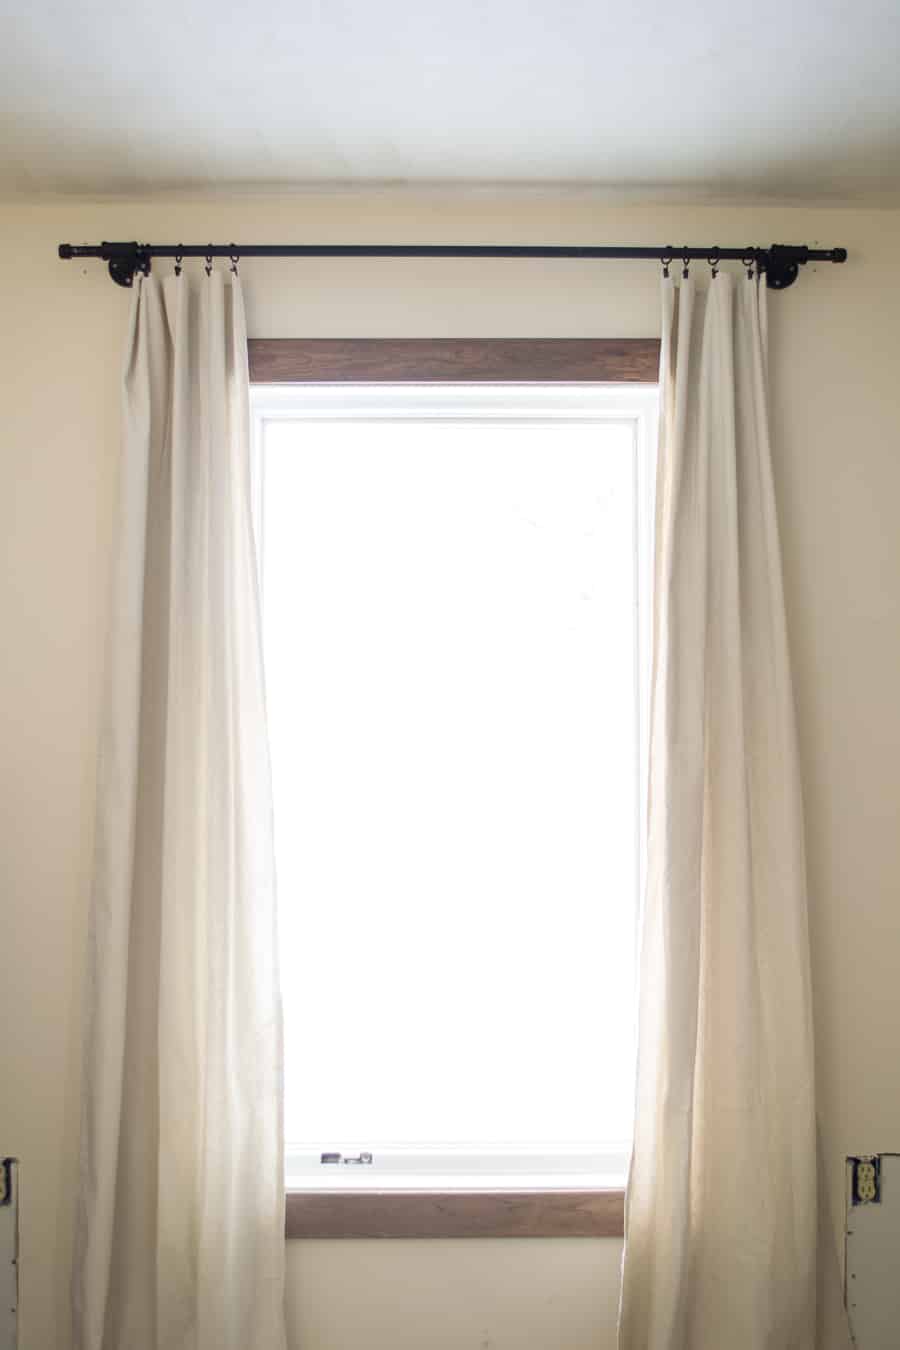 A complete look at the DIY pip curtain rod mounted to the wall, holding two white linen curtain panels.